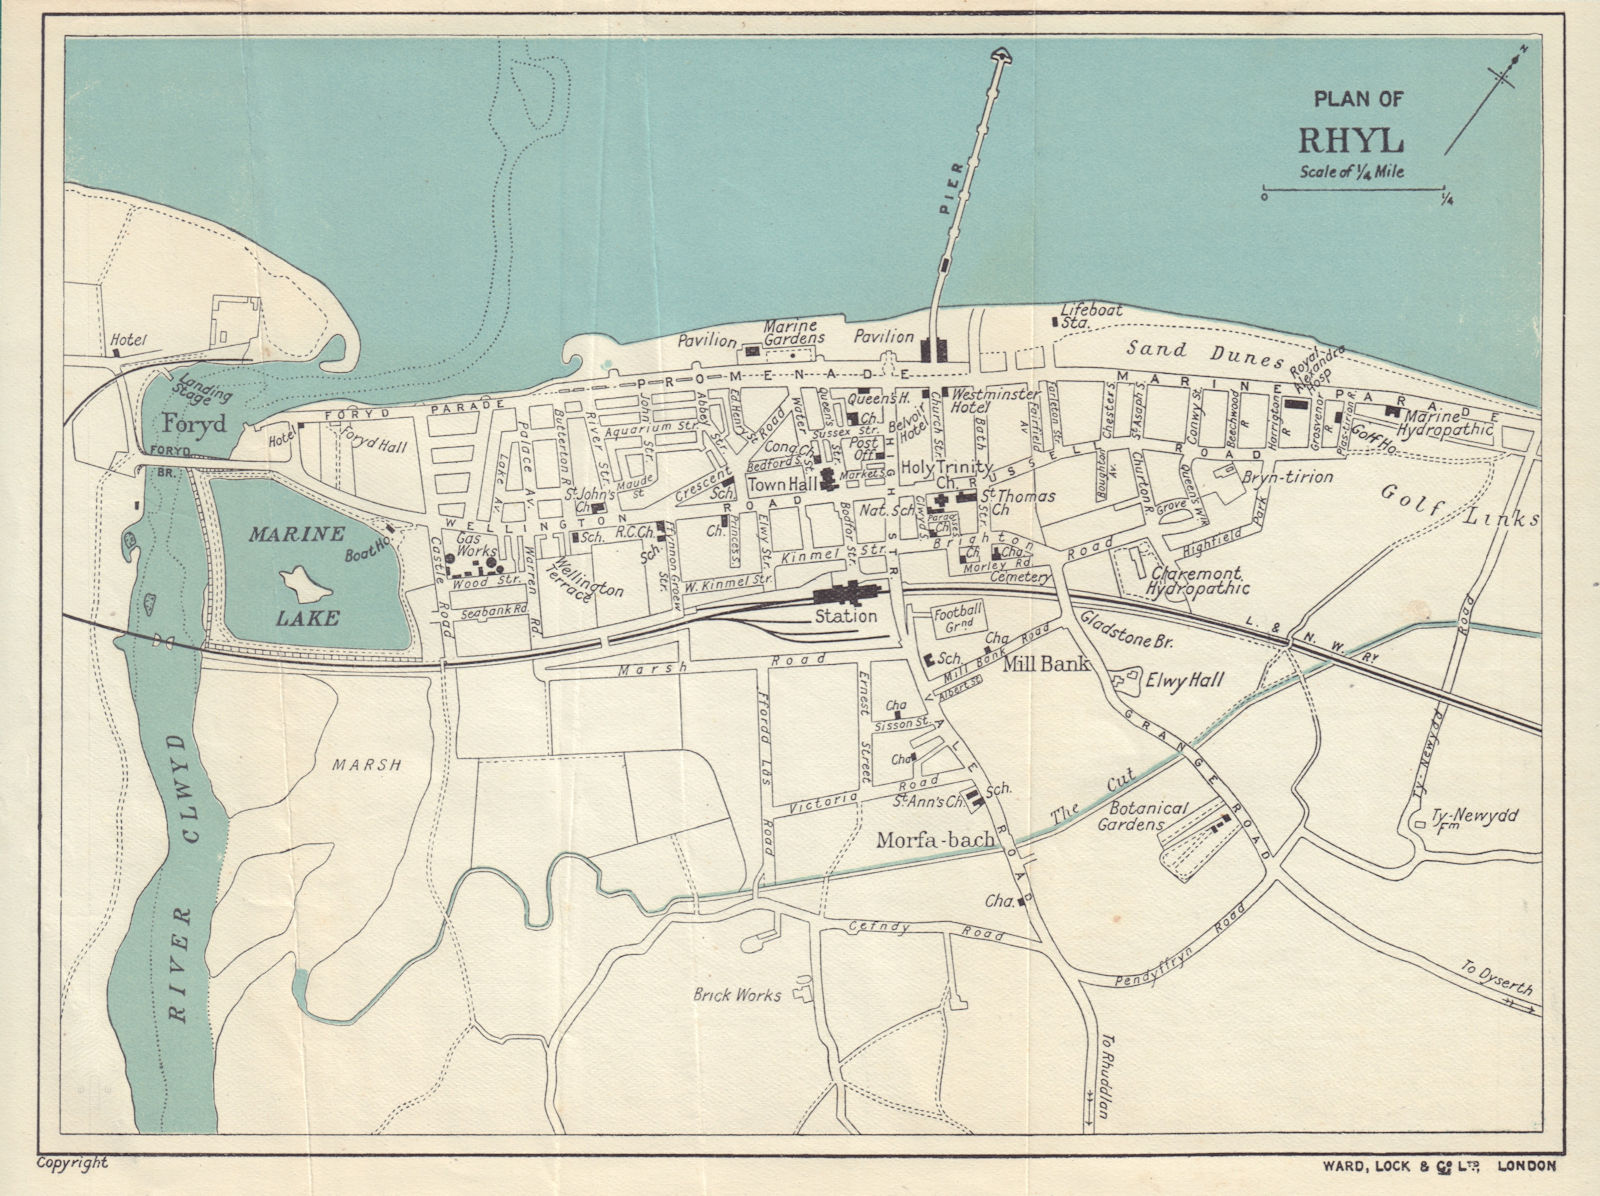 Associate Product RHYL vintage town/city plan. Wales. WARD LOCK 1913 old antique map chart